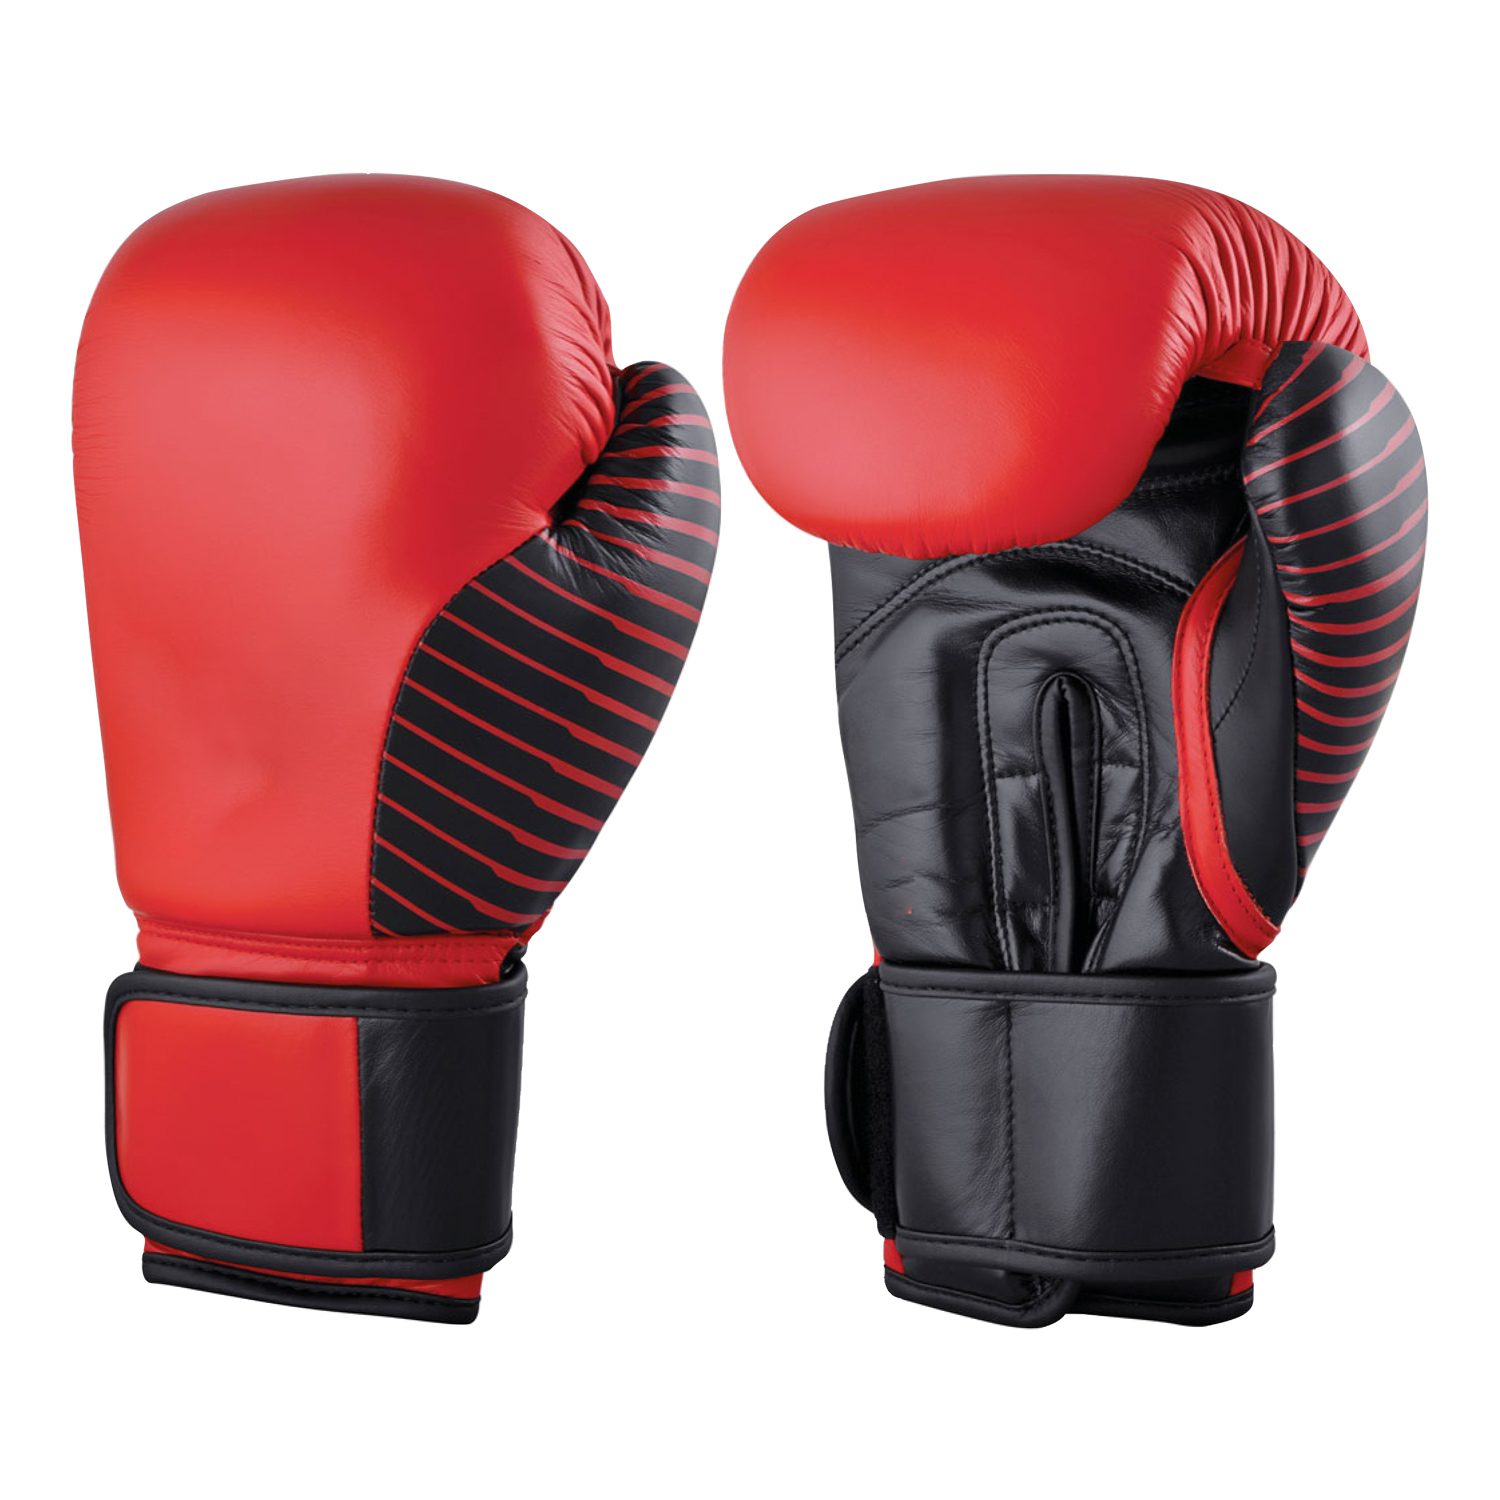 Red custom boxing gloves with black embroidered logo.